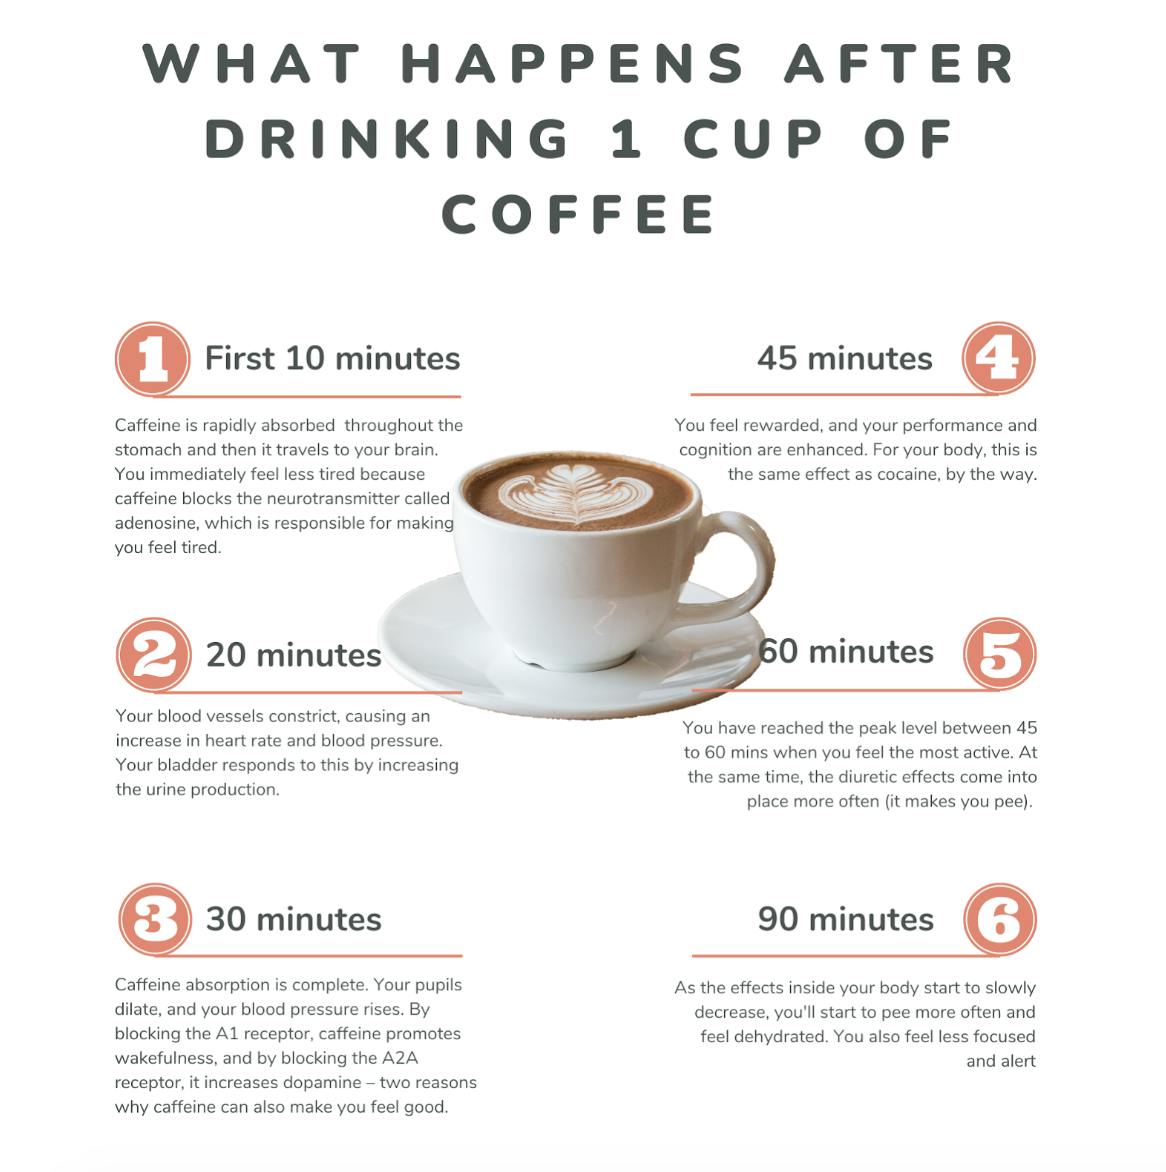 Inforgraphic showing the effects in stages after drinking one cup of coffee